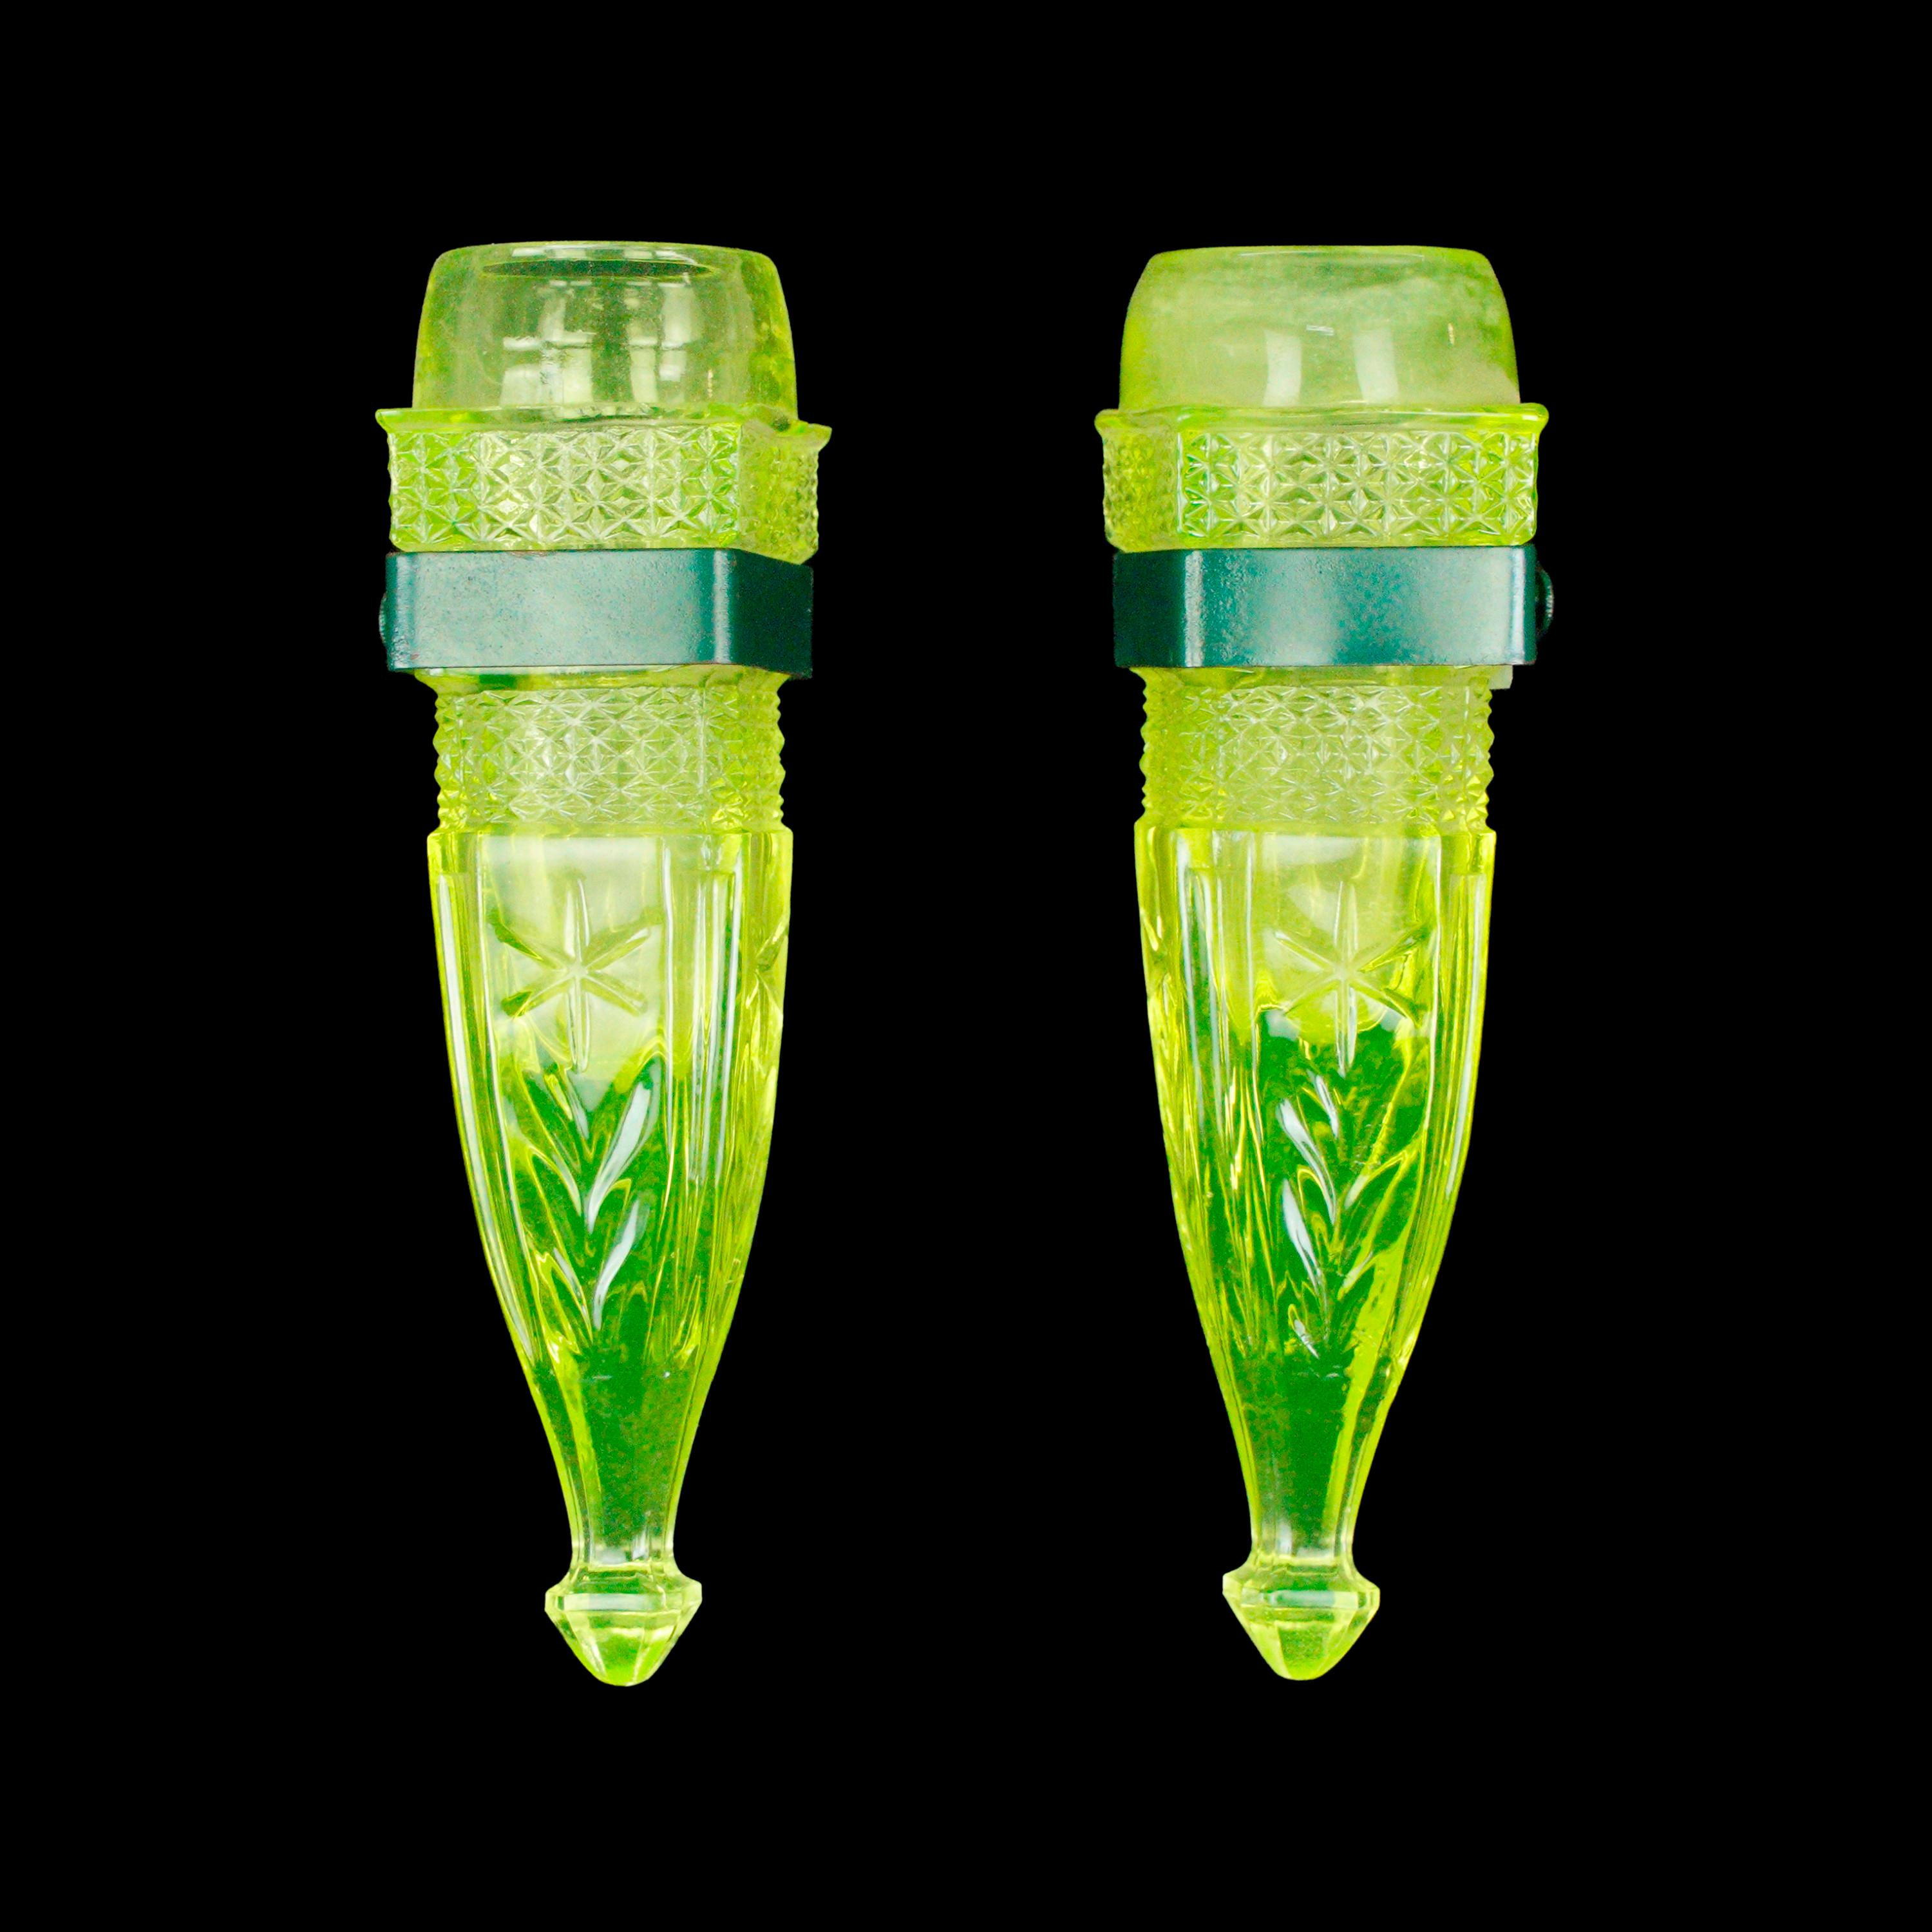 Rare pair of antique green uranium glass and green painted steel automotive vases. Good condition with appropriate wear from age. Priced as a pair. Cleaned and restored. Please note, this item is located in our Scranton, PA location.